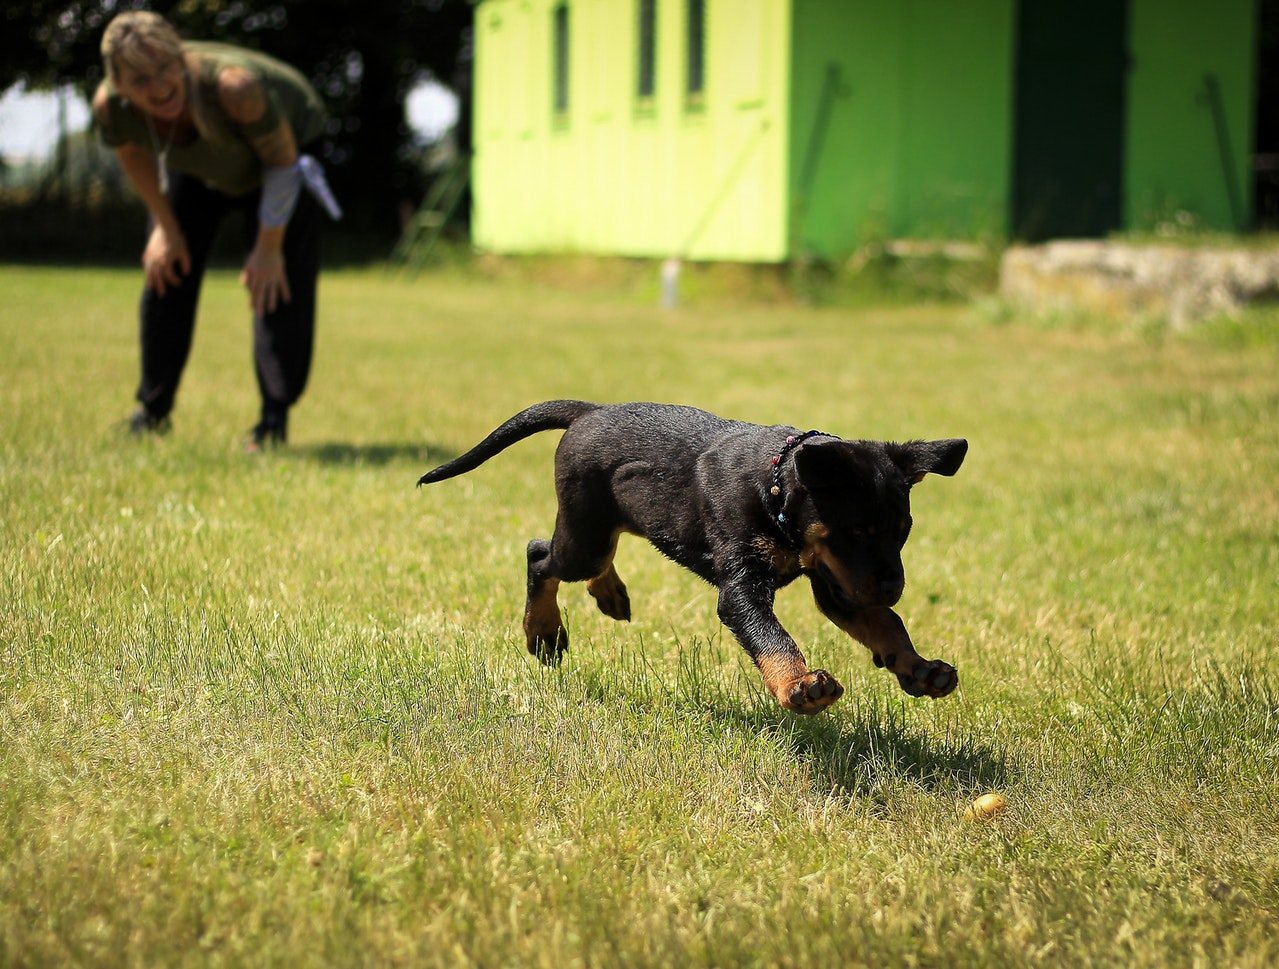 When Is The Best Age For Training A Dog?